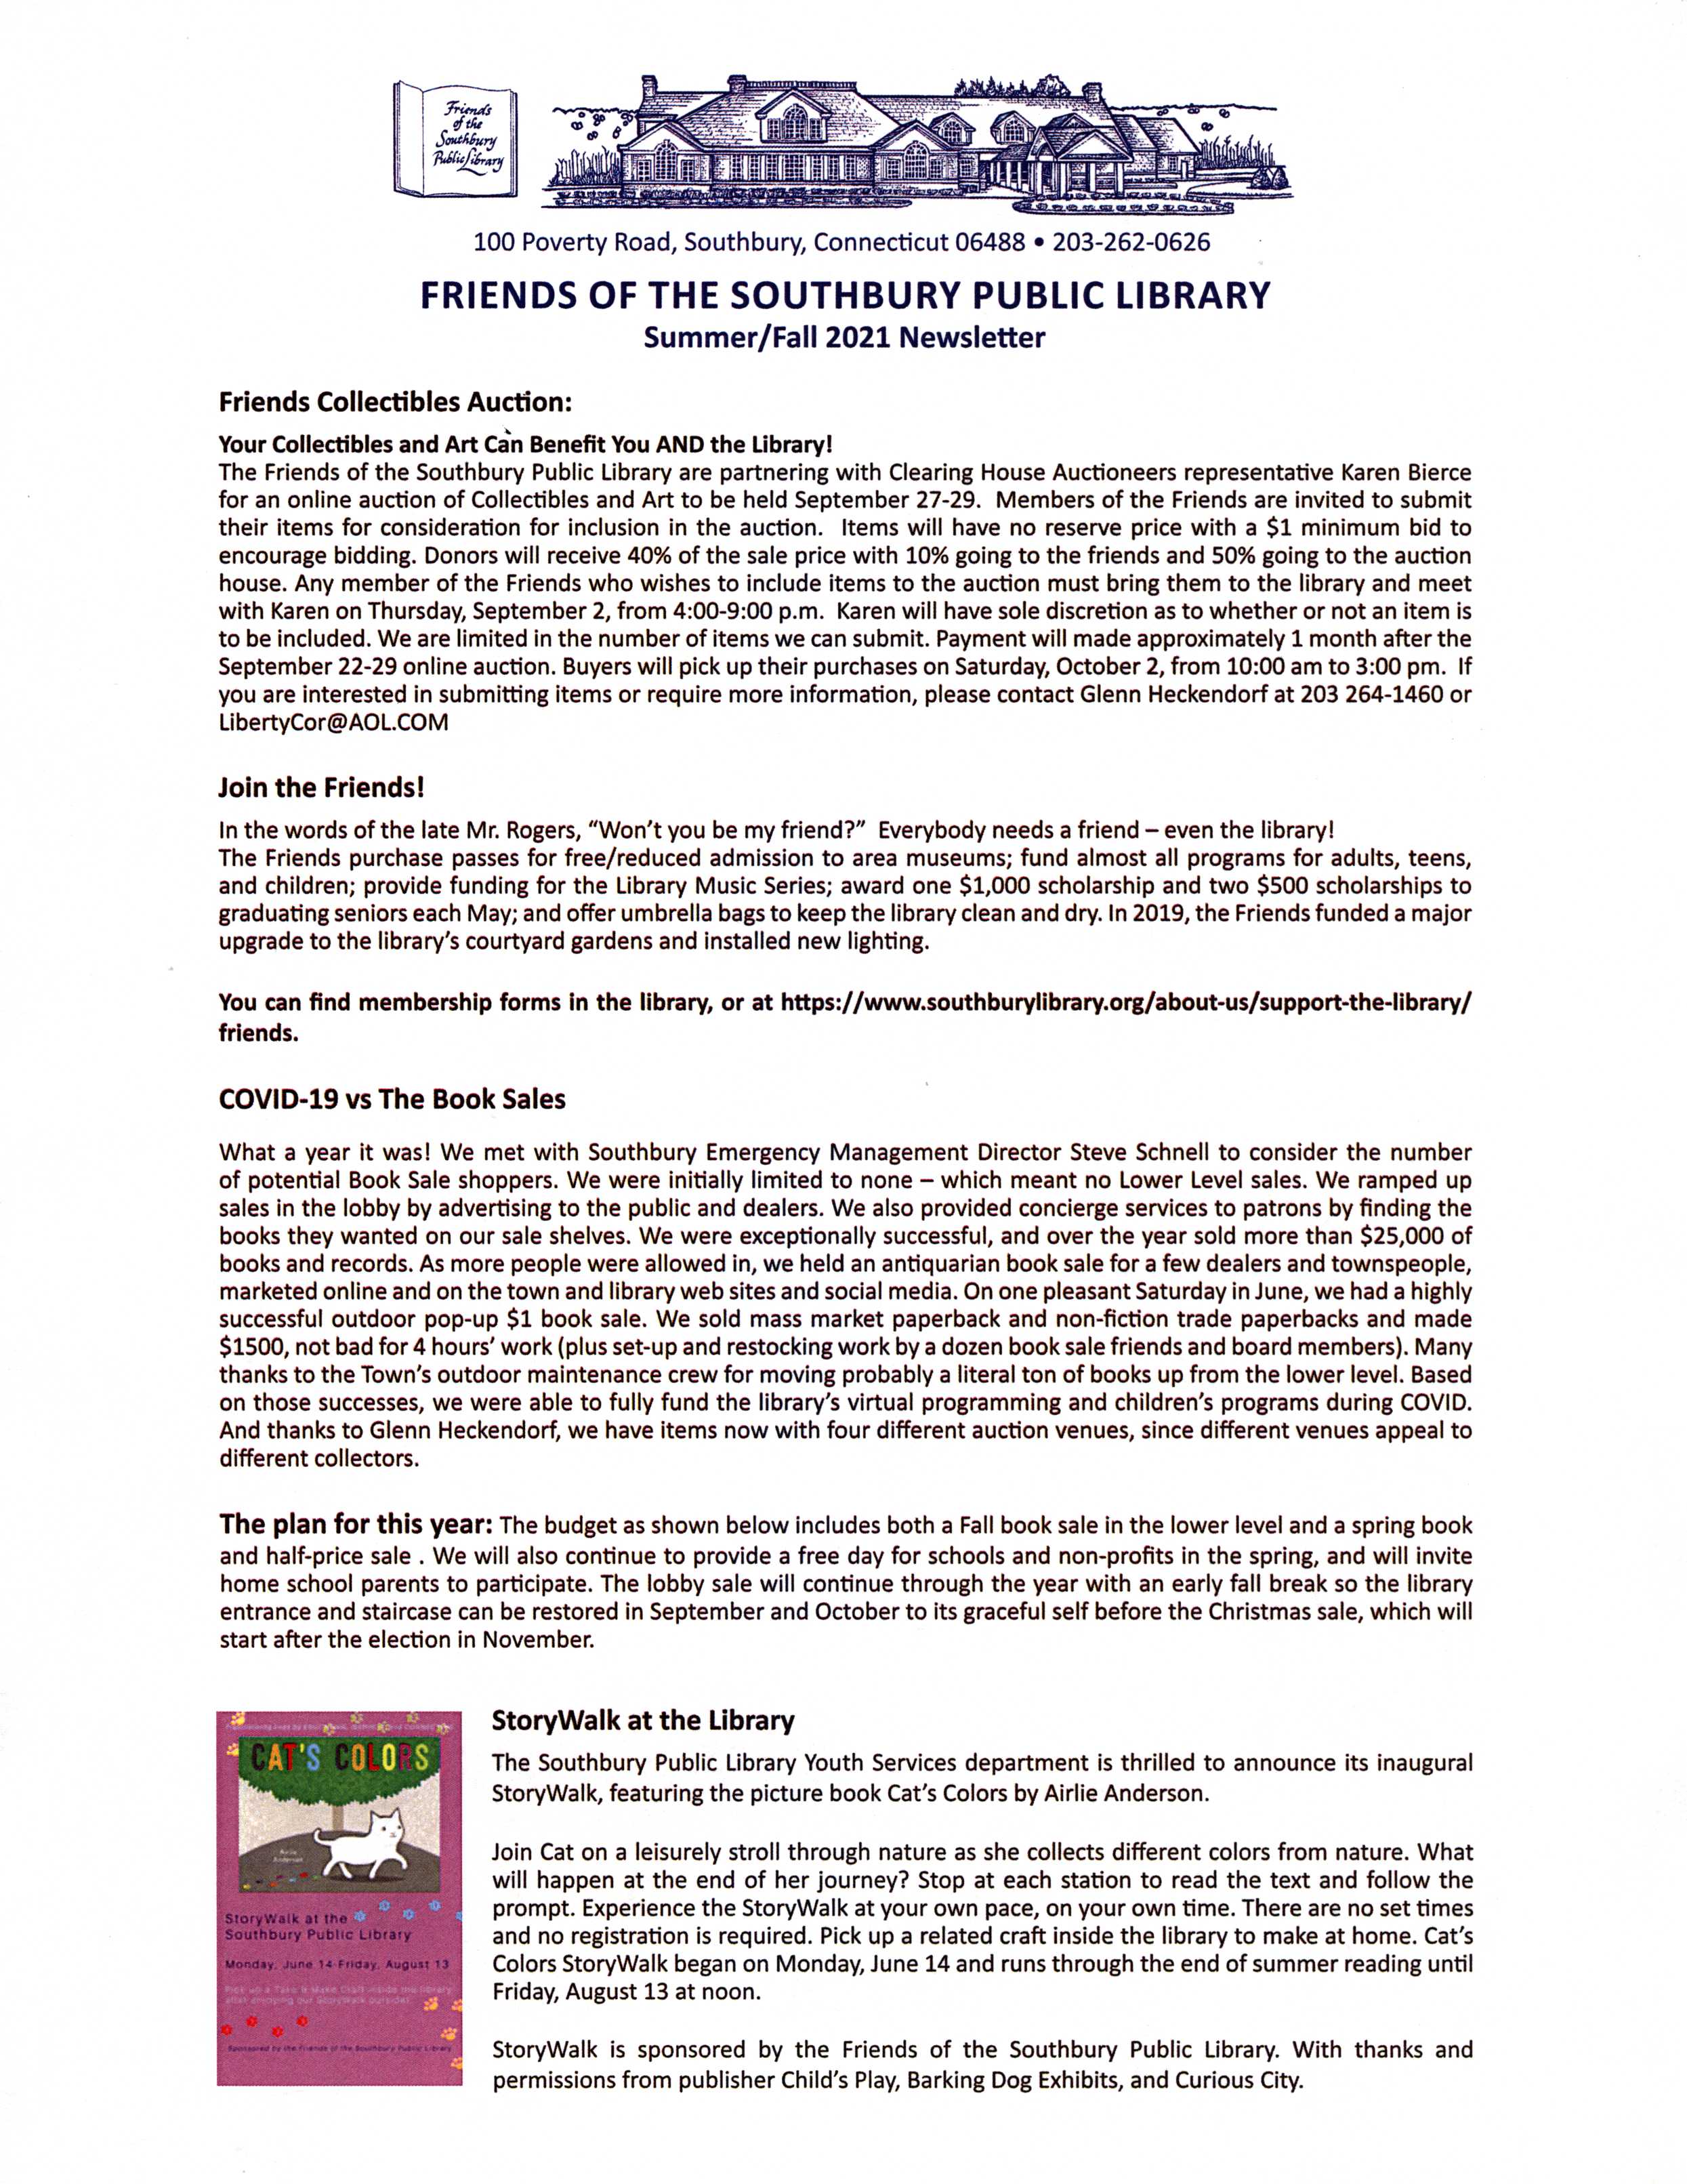 First page of the Friends of the Southbury Library's Summer/Fall 2021 Newsletter